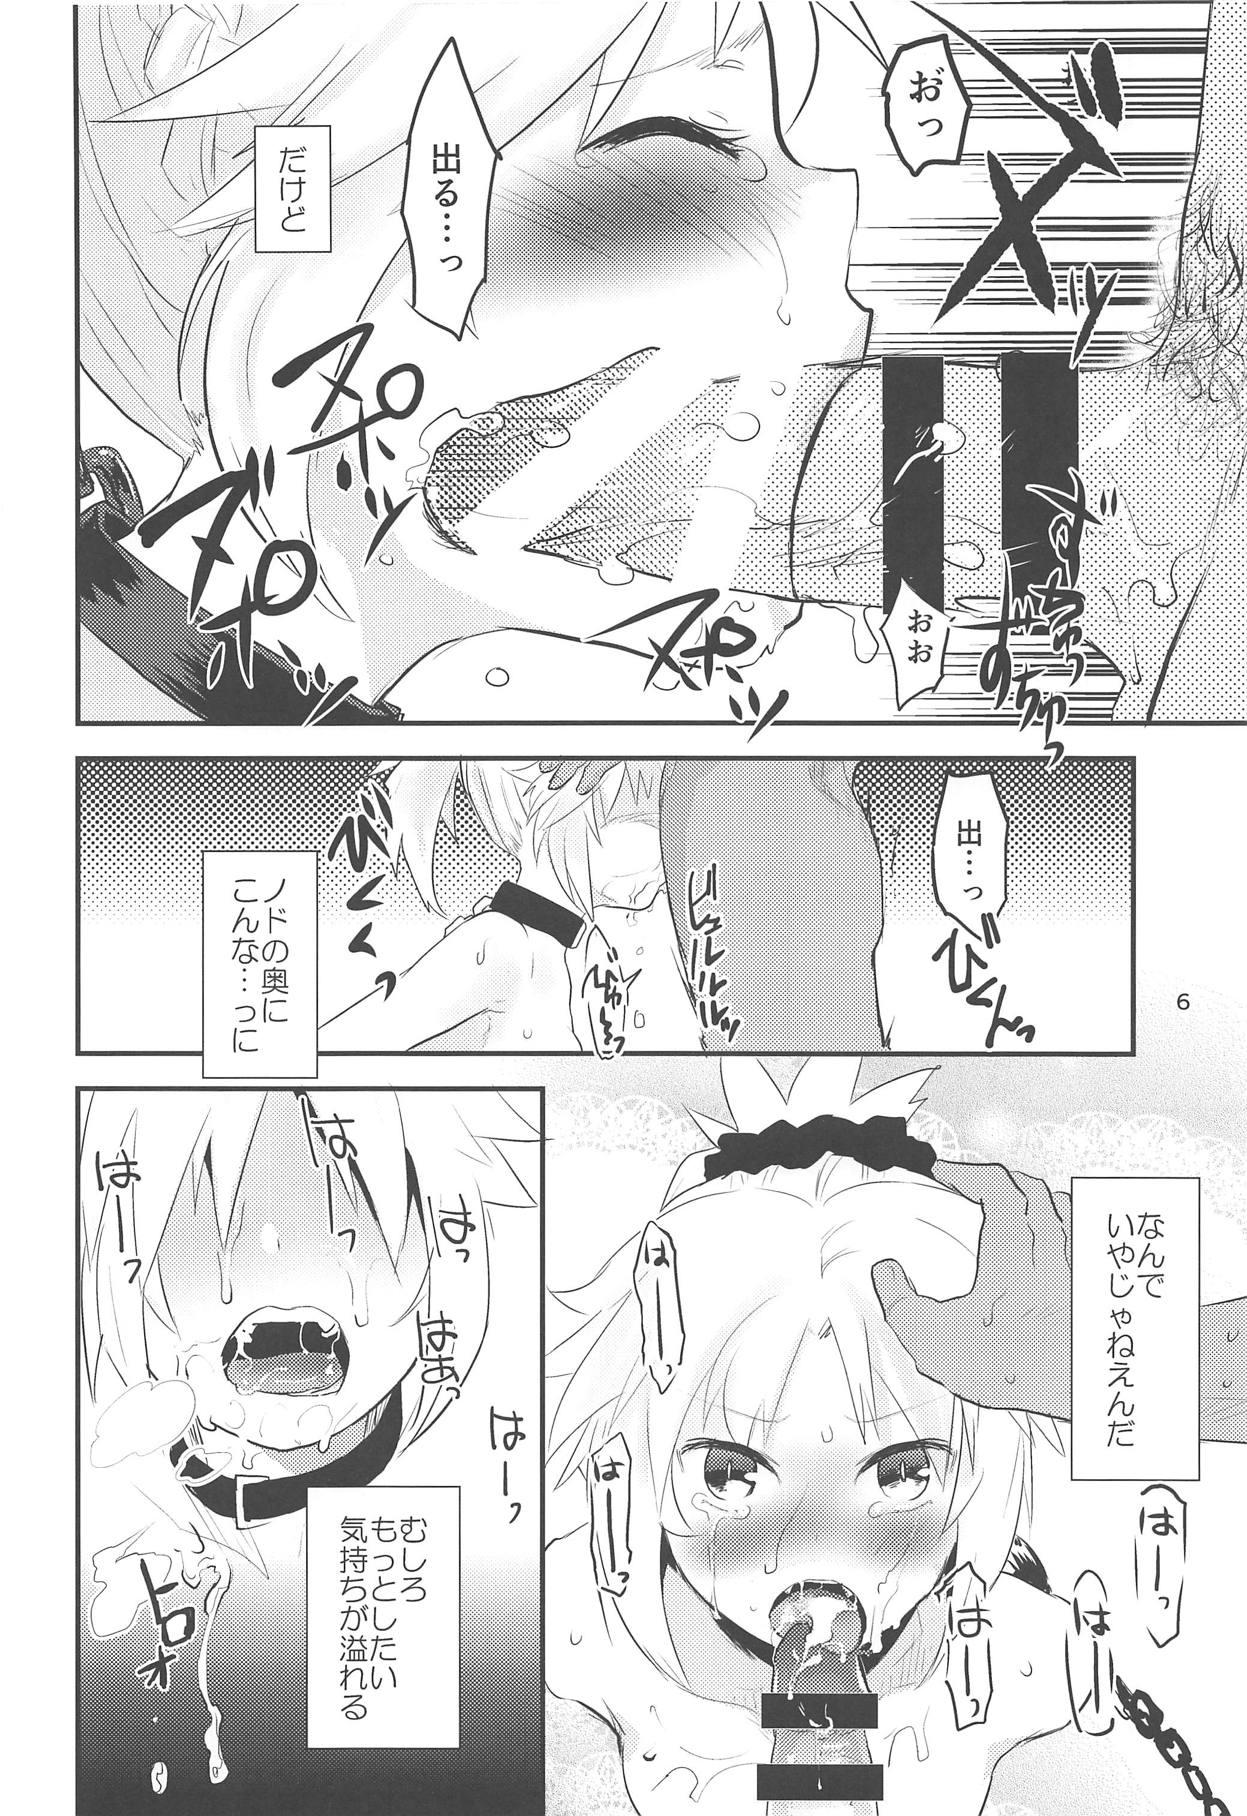 Interracial Sex Erotic to Knight - Fate grand order Cut - Page 5